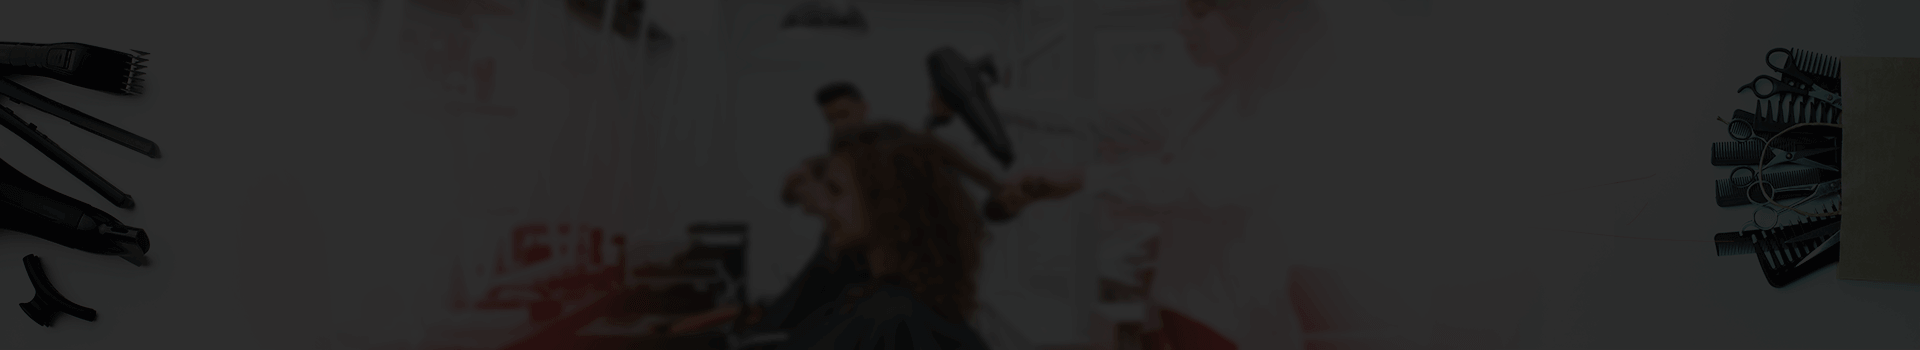 Share Your Salon Booking App Requirements